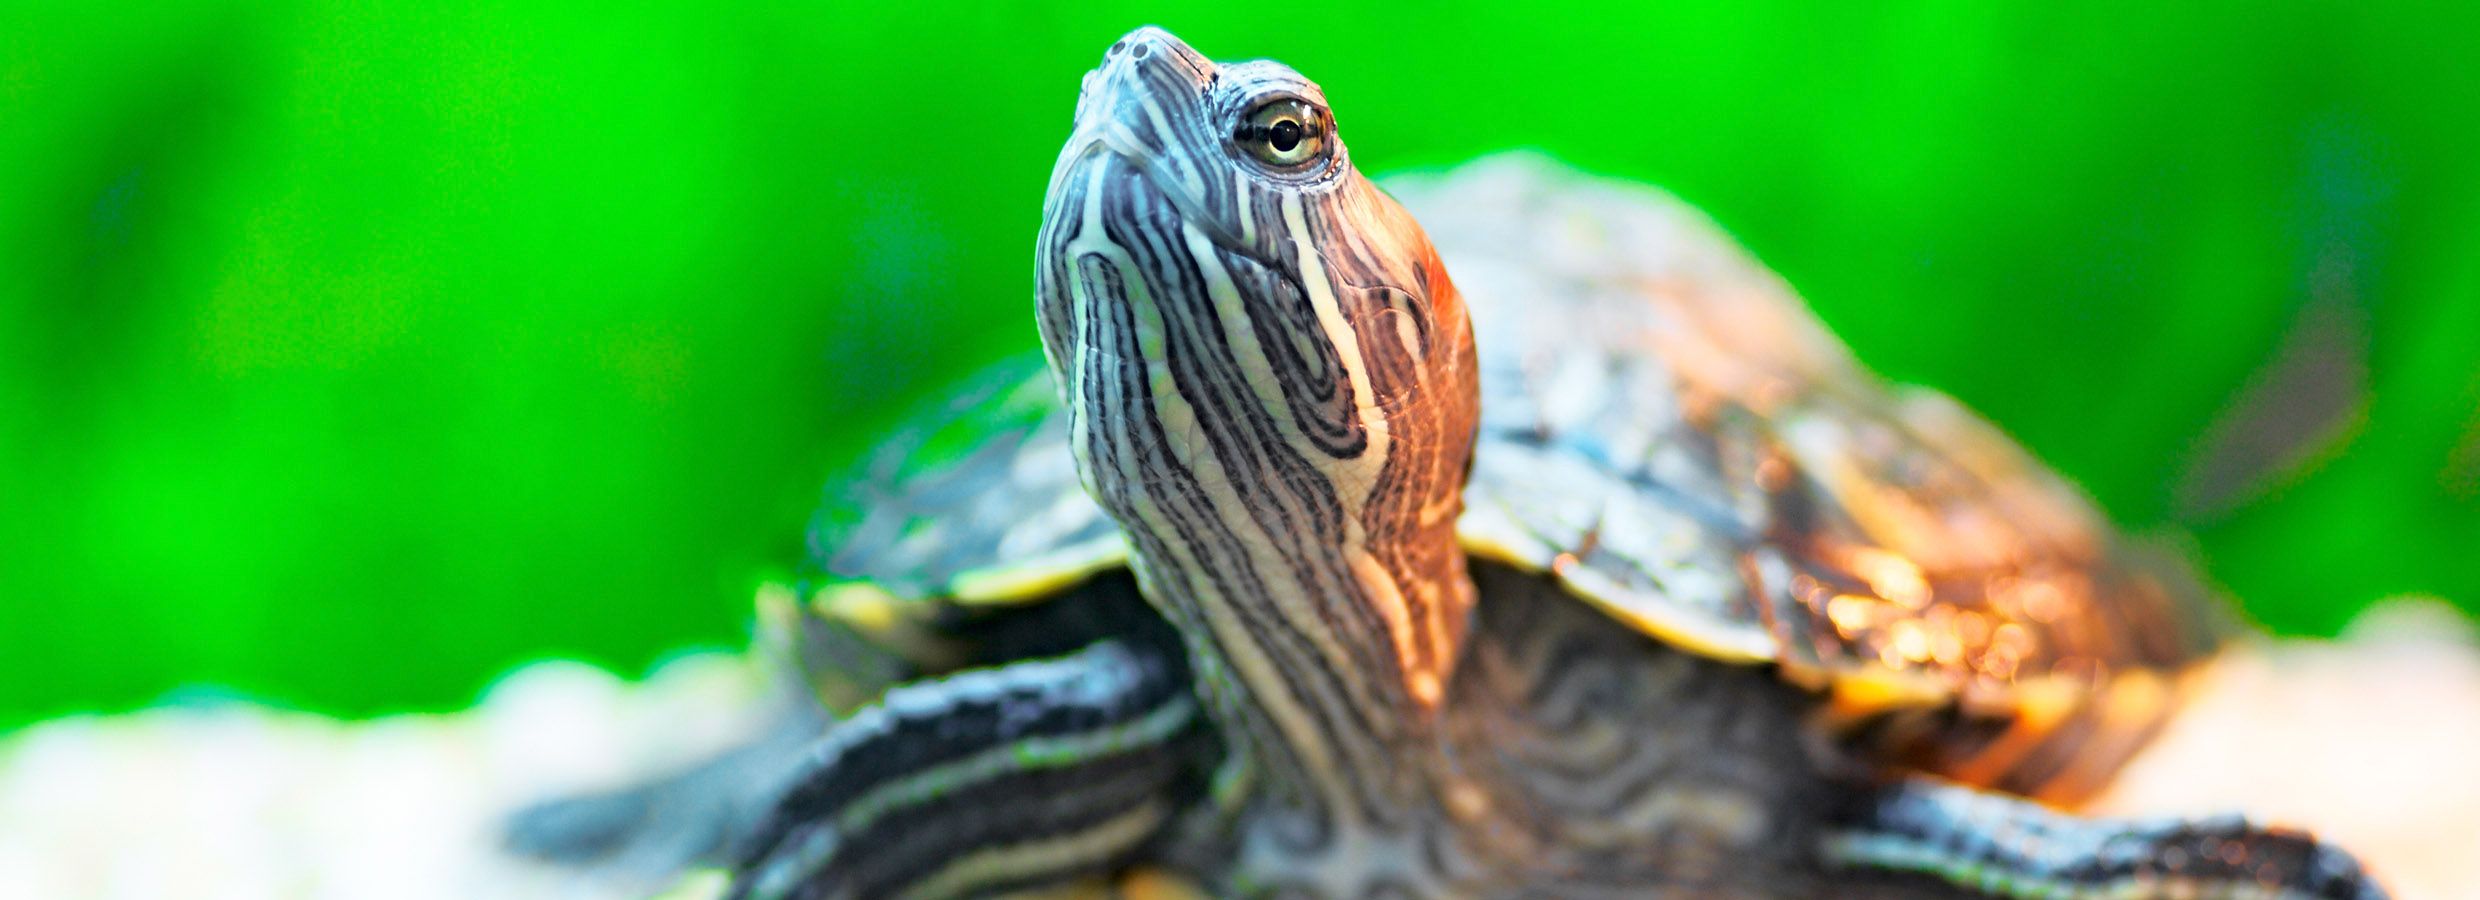 What To Feed Your Turtle or Tortoise - Basics & Guides